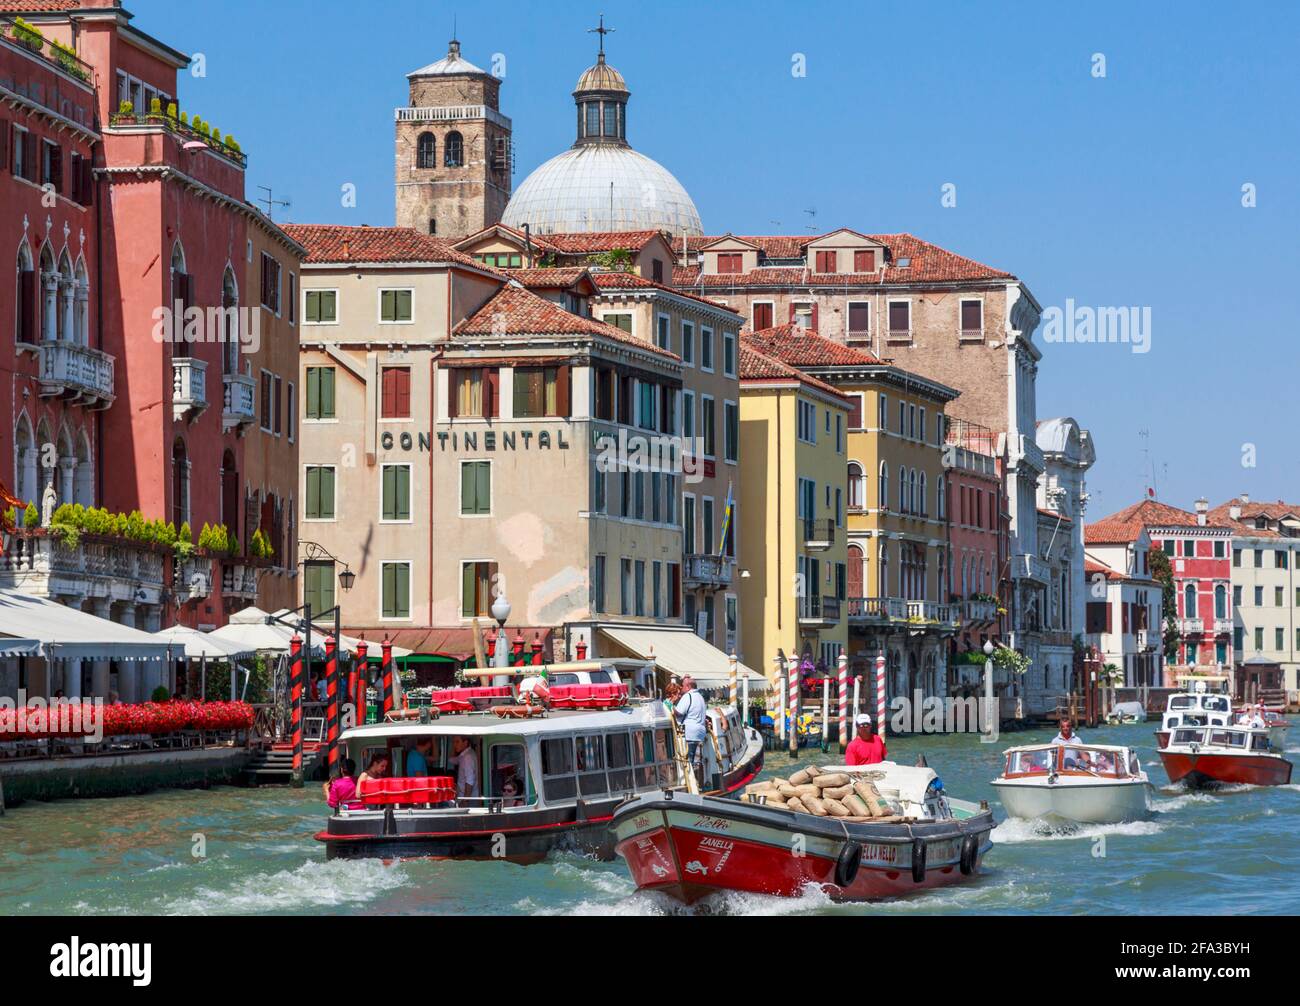 Venice, Venice Province, Veneto Region, Italy.  Typical scene on the Grand Canal. Venice and its lagoon are a UNESCO World Heritage Site. Stock Photo